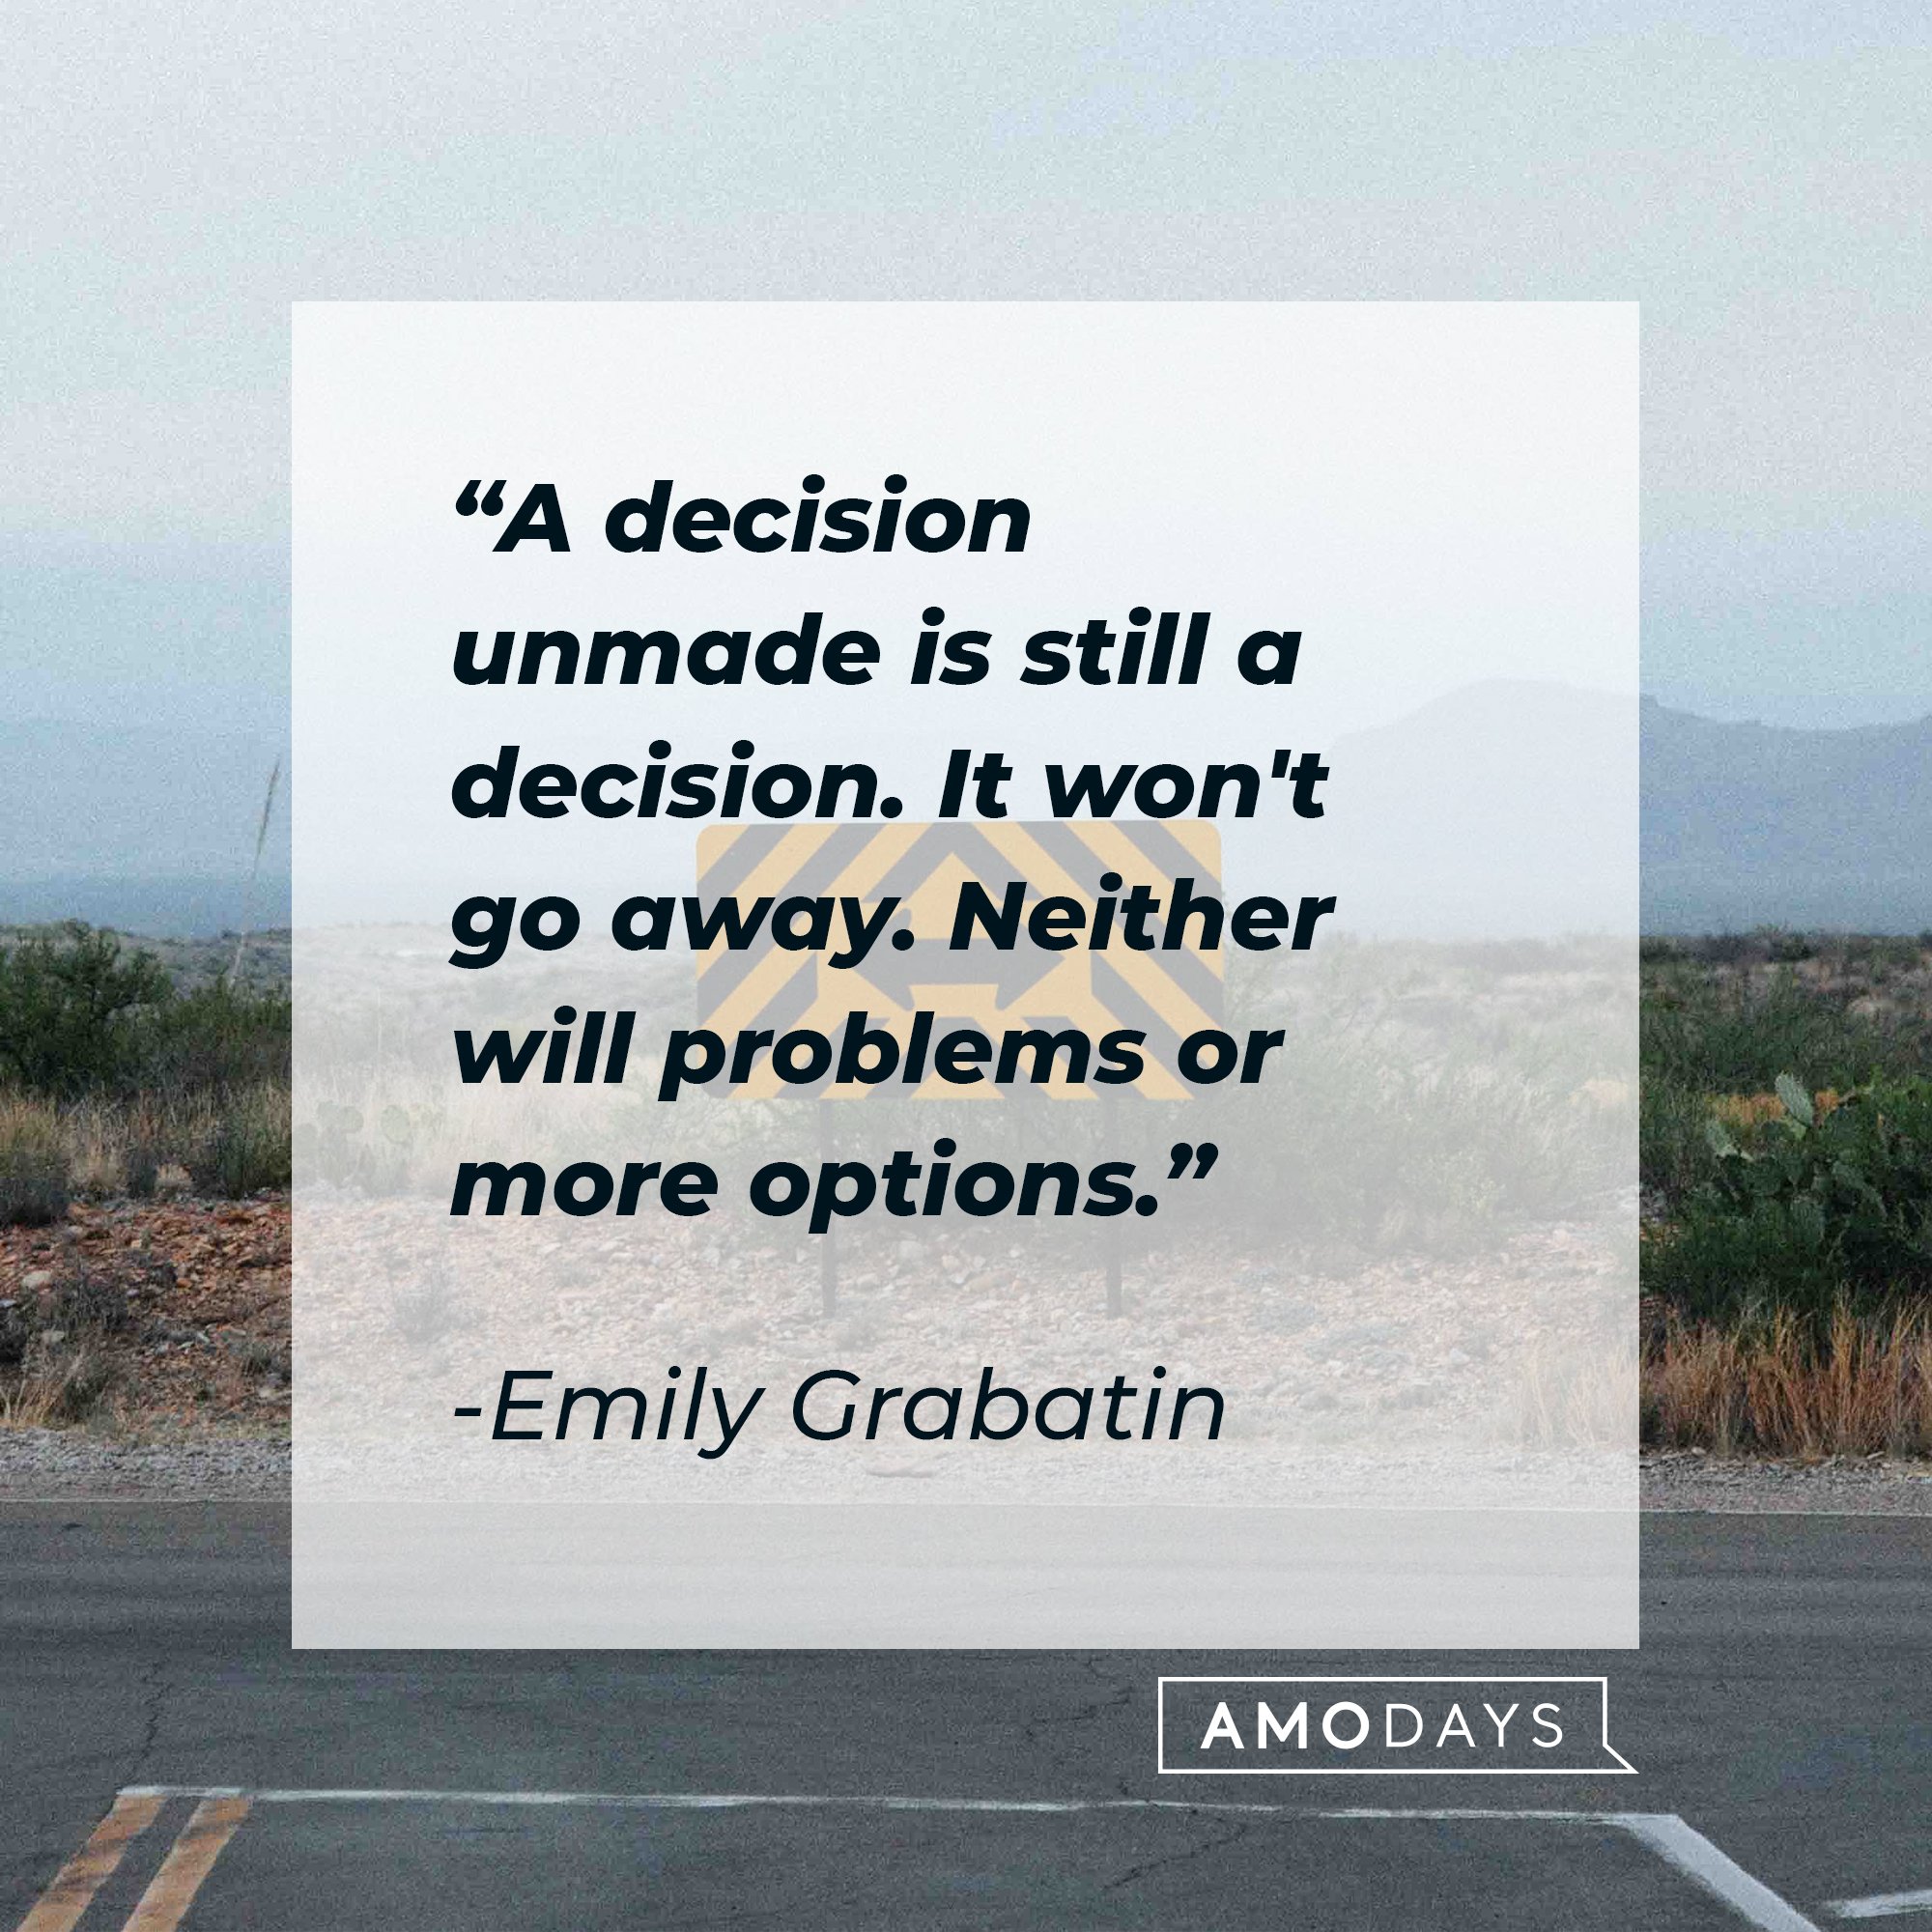  Emily Grabatin’s quote: "A decision unmade is still a decision. It won't go away. Neither will problems or more options." | Image: AmoDays